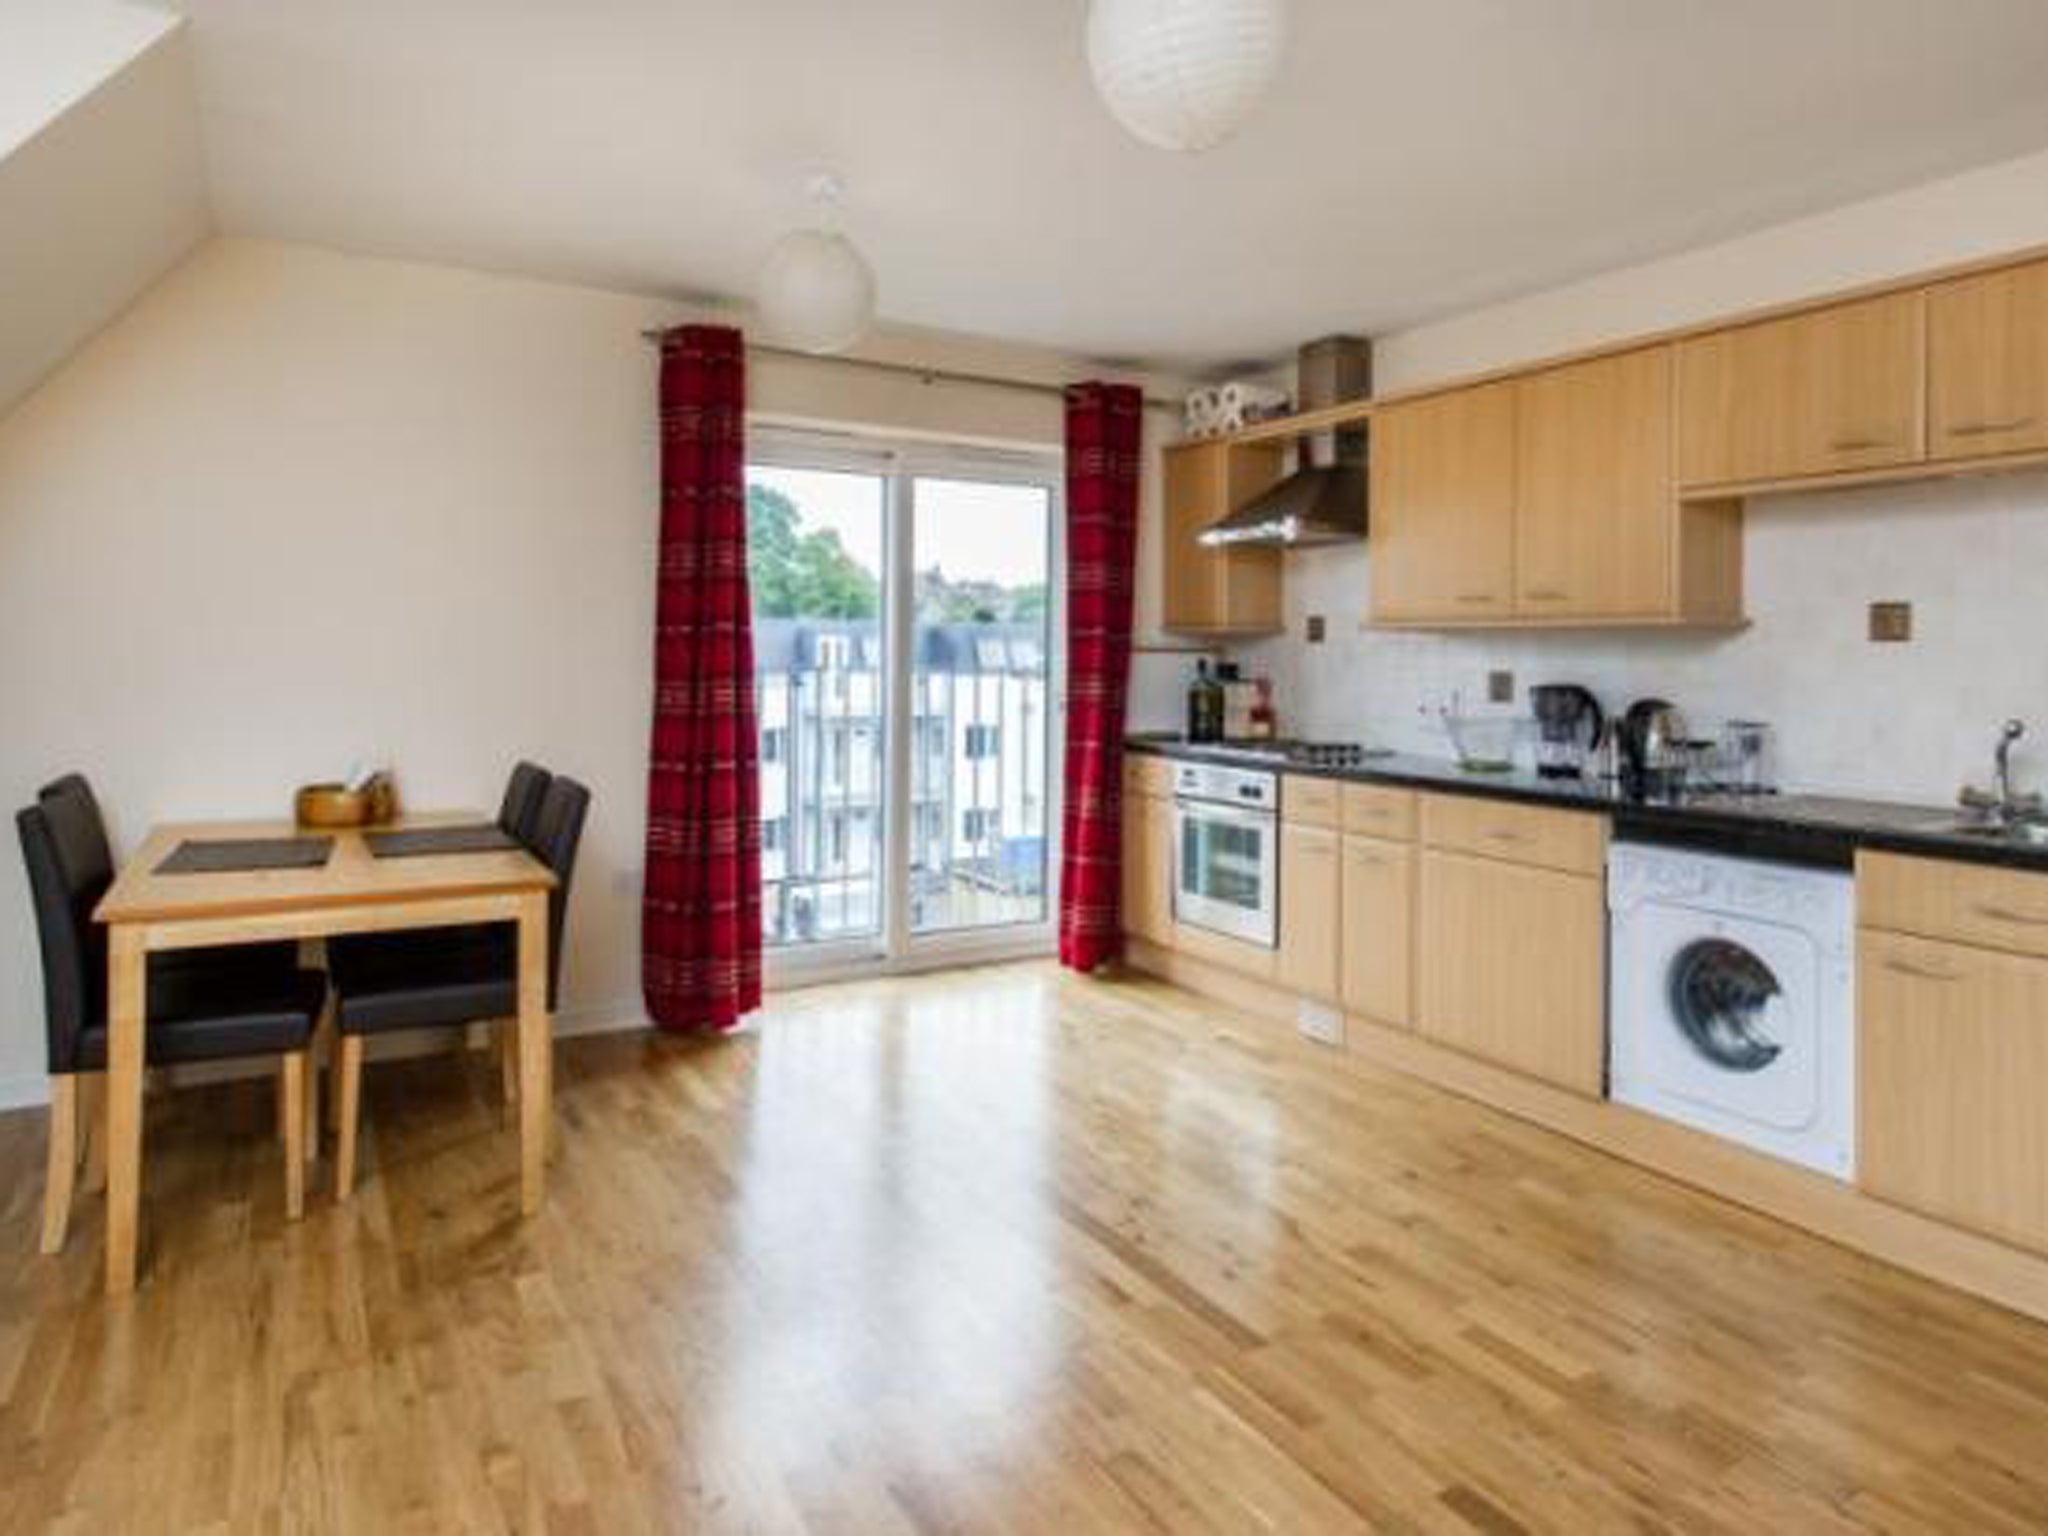 A 2 bedroom flat for sale on Oxford Road, Cowley, Oxford. On with Oxford Apartments for £245,000.